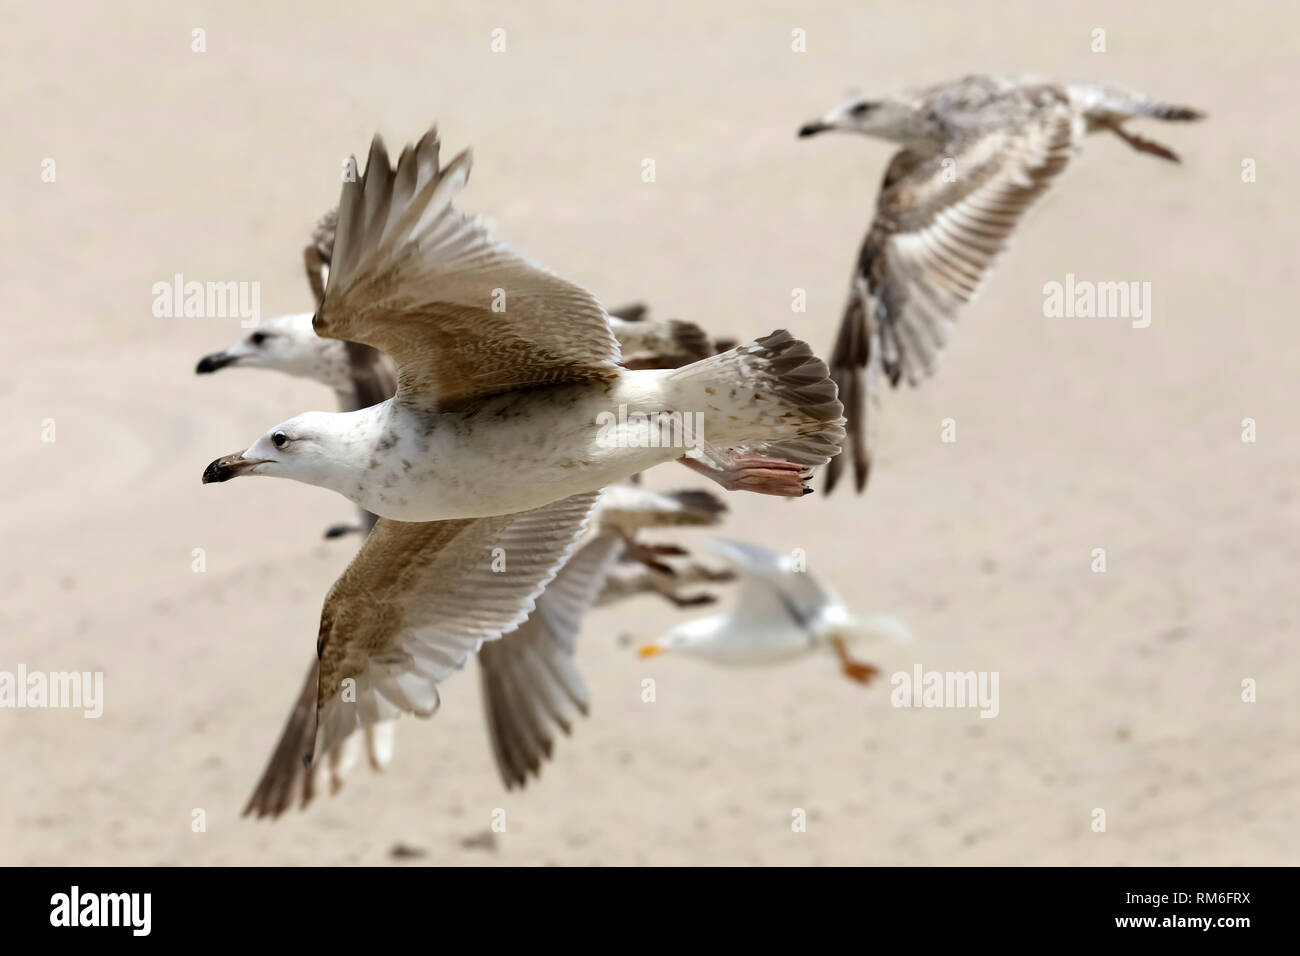 Just above the sandy beach a group of seagulls can be seen in a fast flight. This has been observed in Kolobrzeg, Poland. Stock Photo